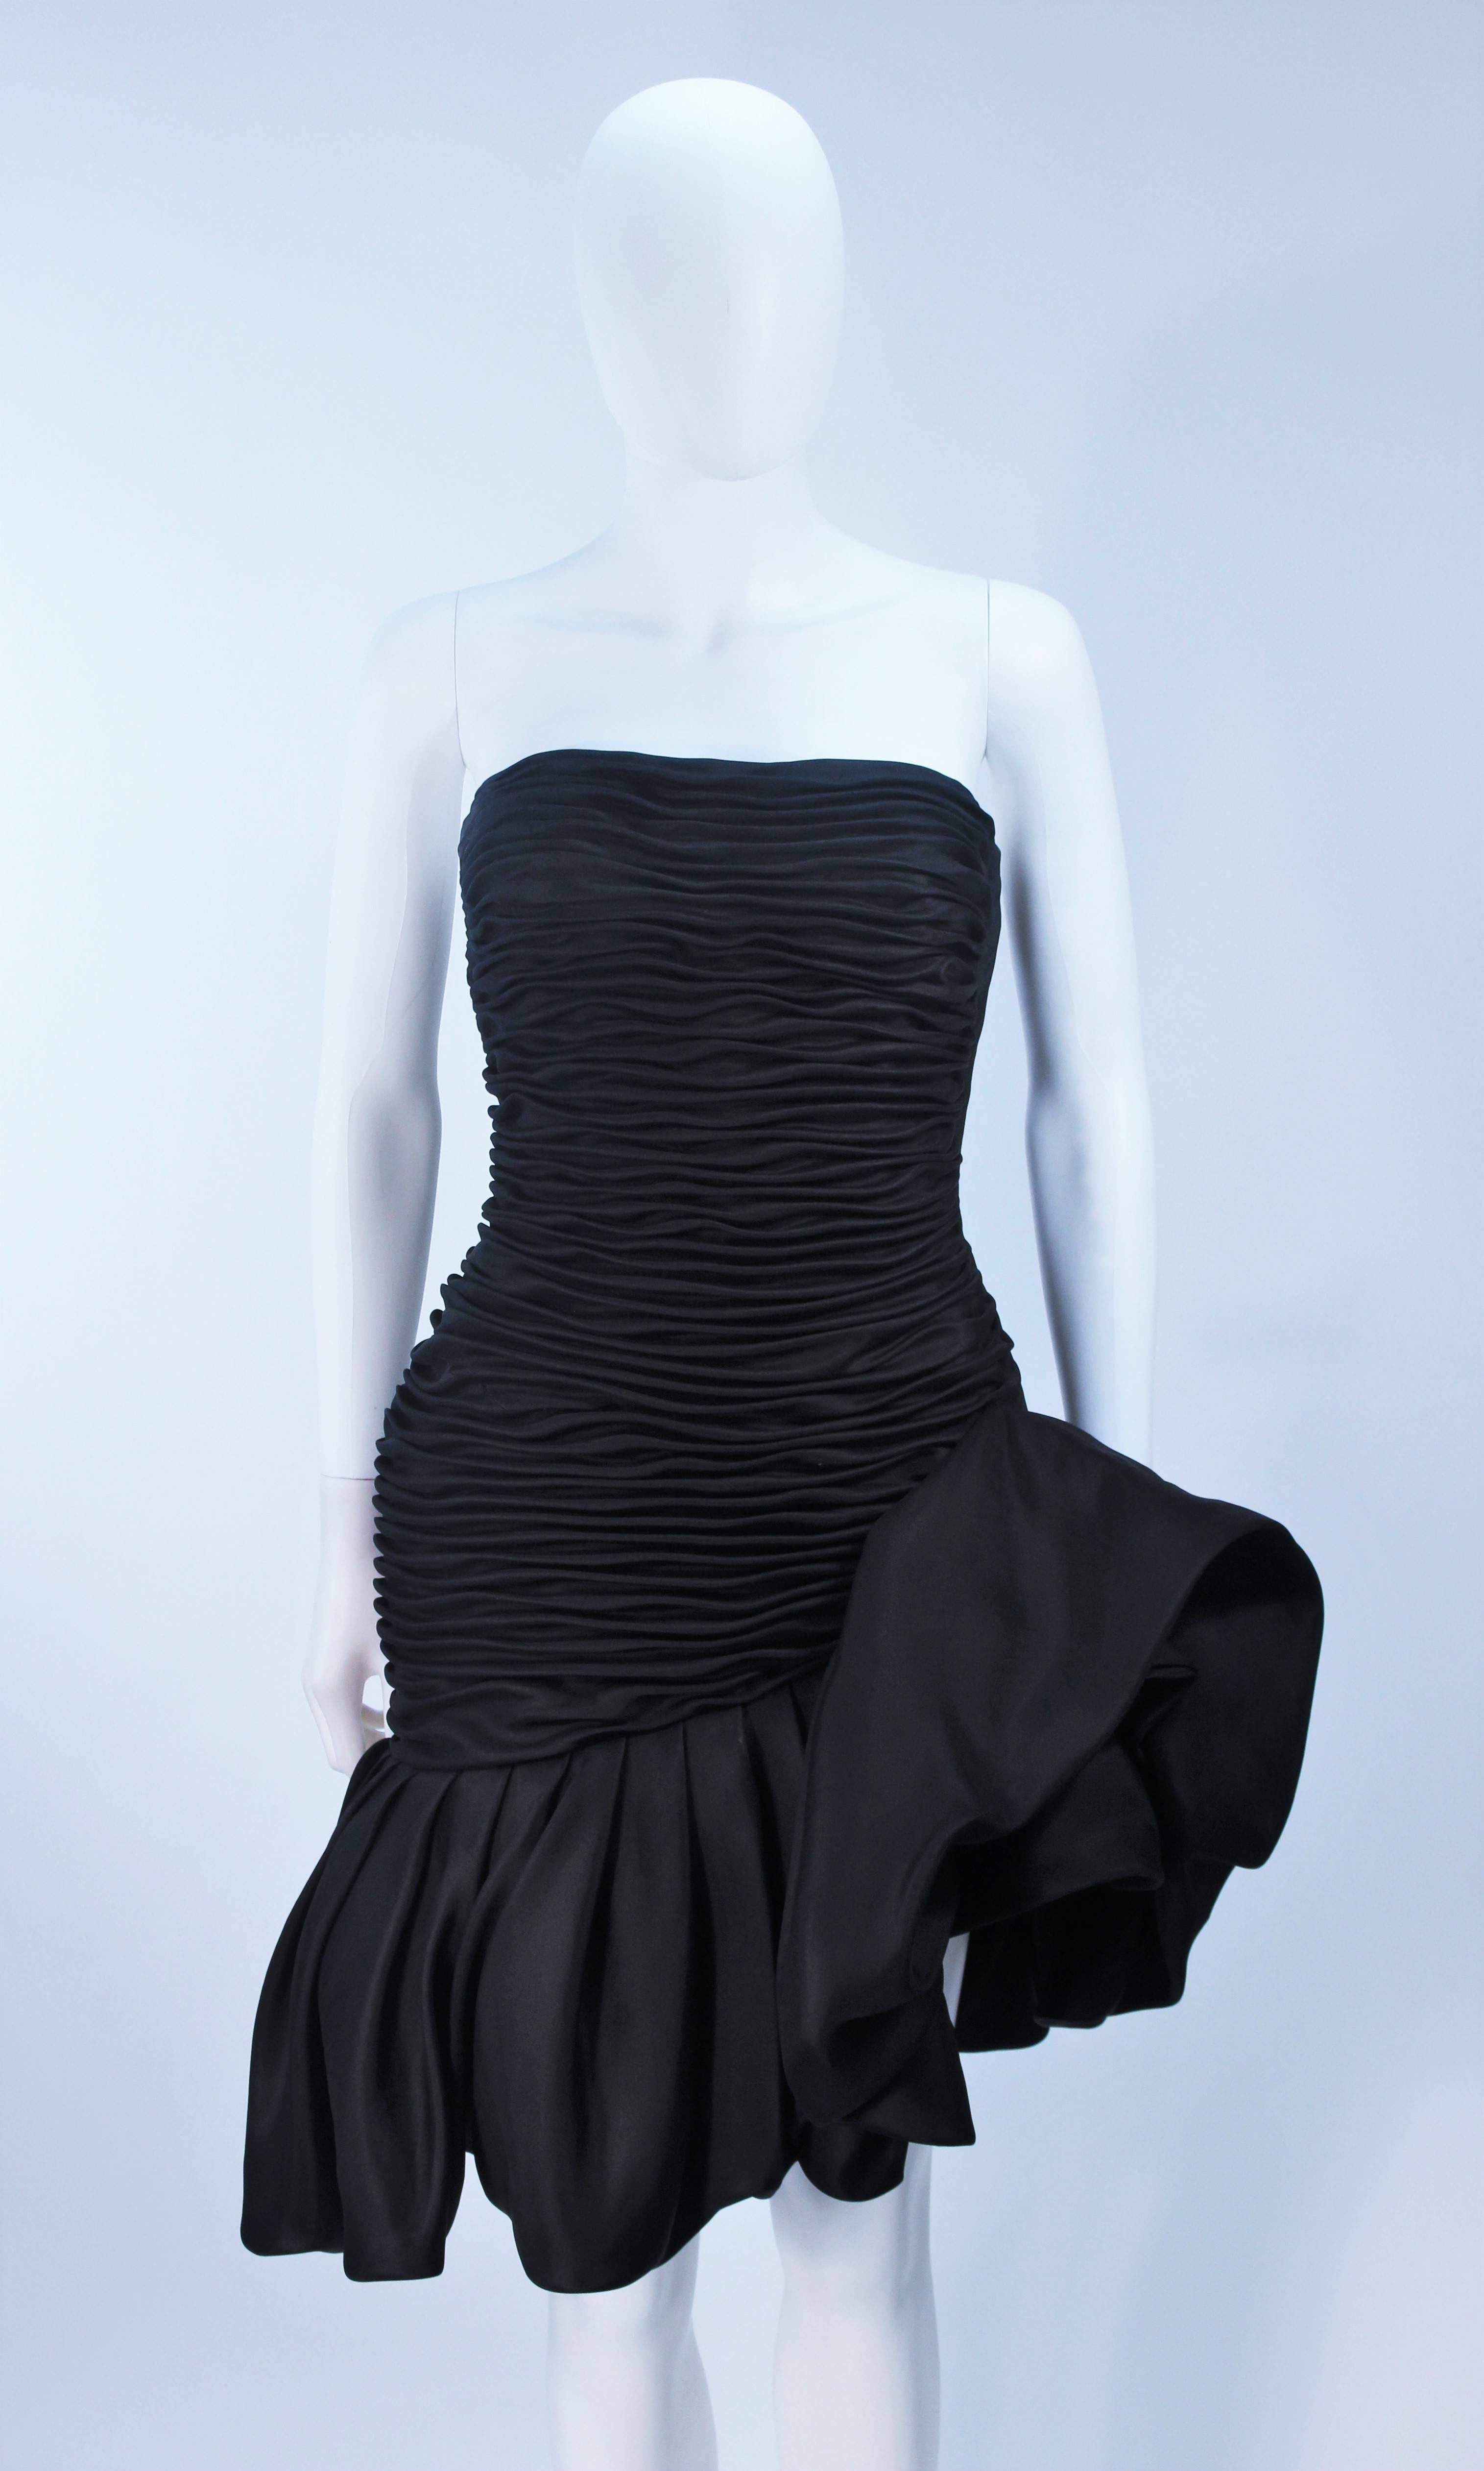 UNGARO Black Silk Gathered Cocktail Dress with Ruffle Detail Size 4-6 In Excellent Condition For Sale In Los Angeles, CA